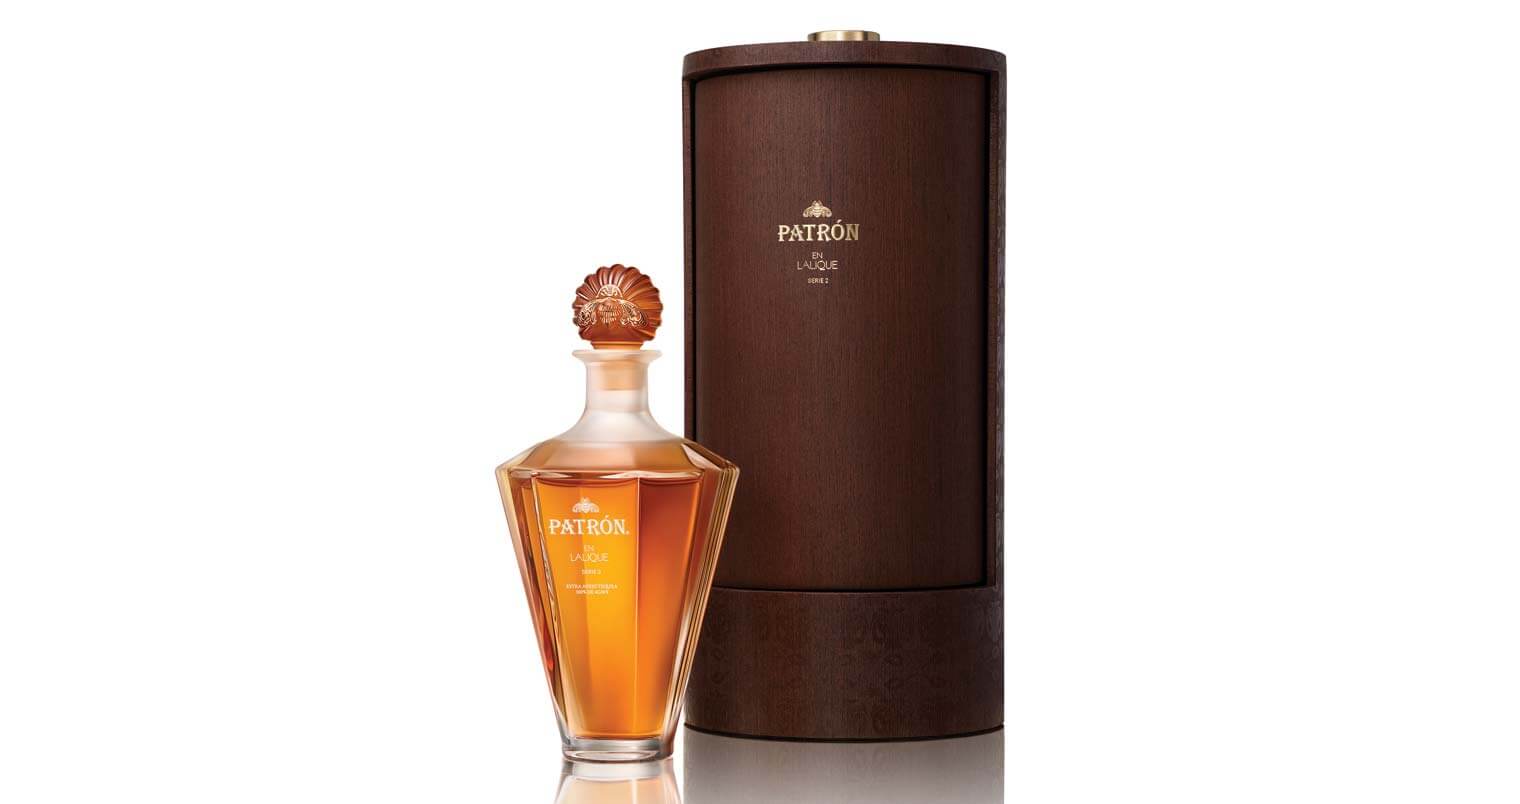 Patrón en Lalique, Series 2, bottle and packaging on white, featured image